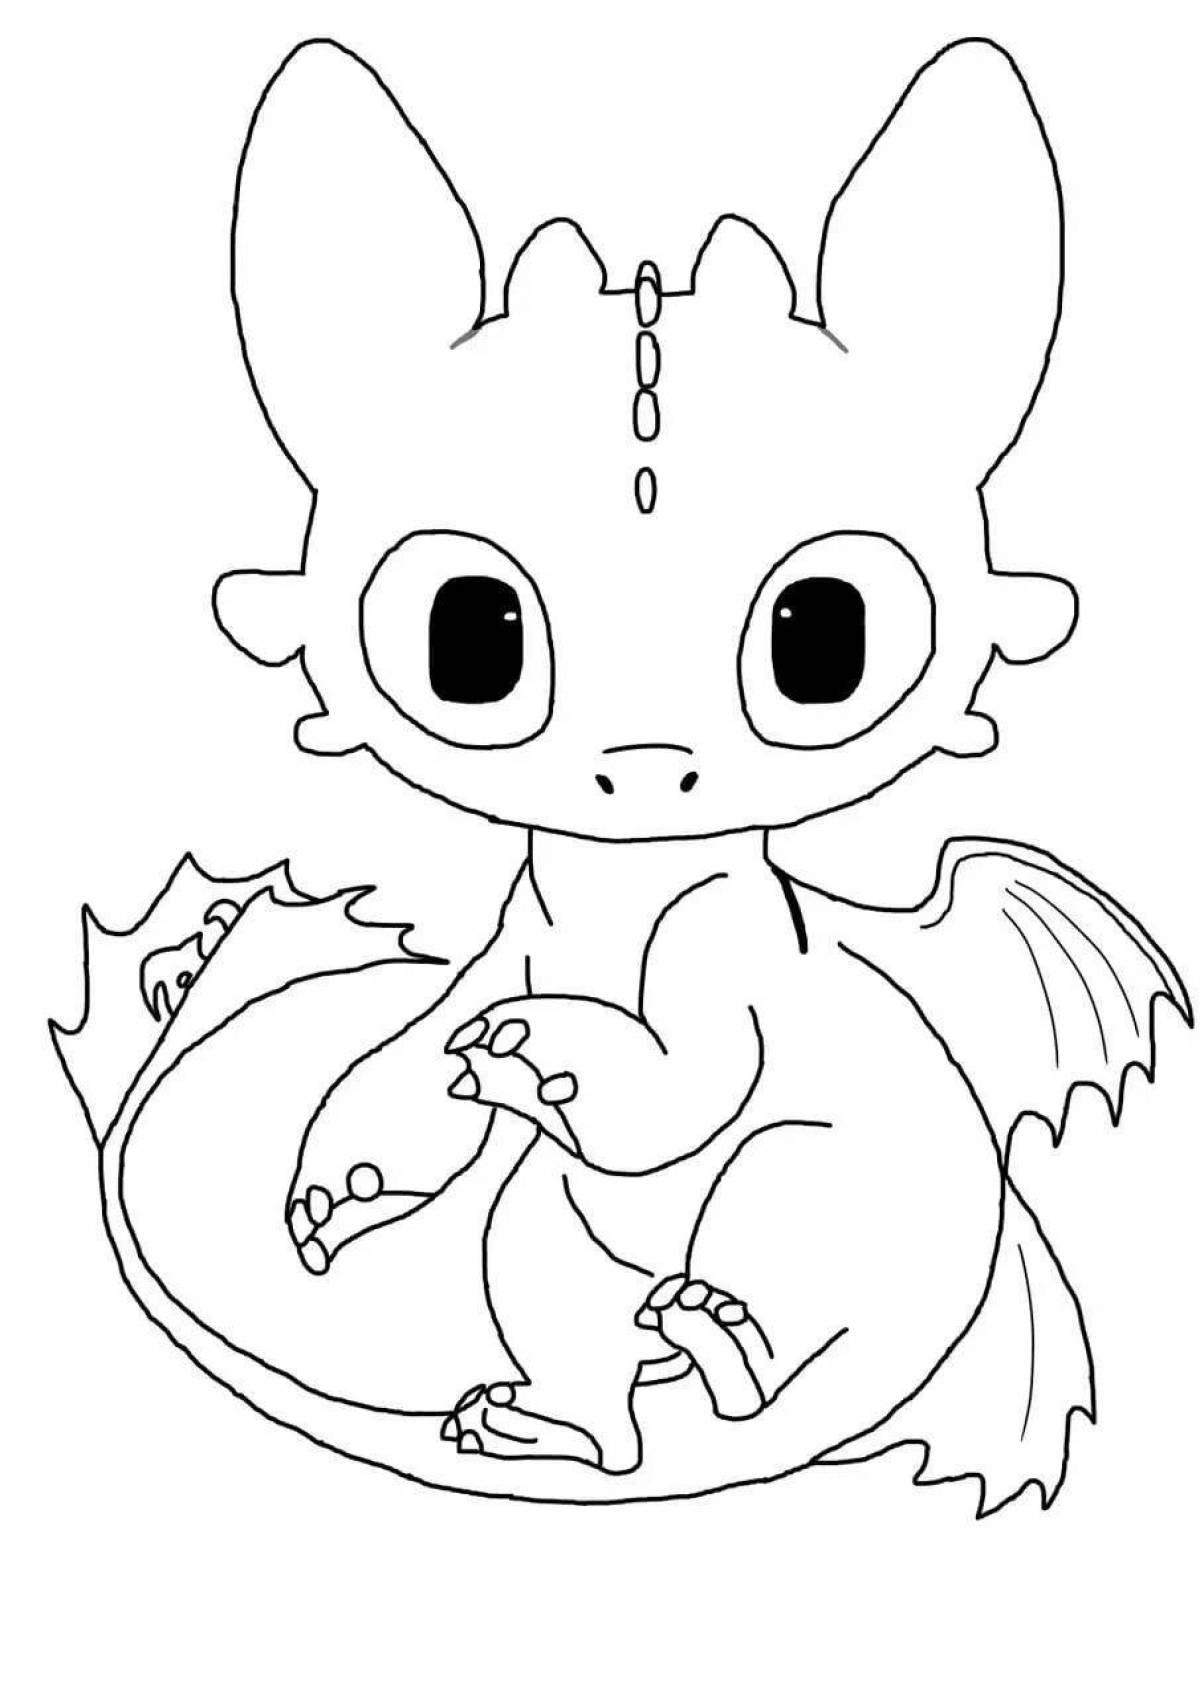 Adorable toothless coloring by numbers